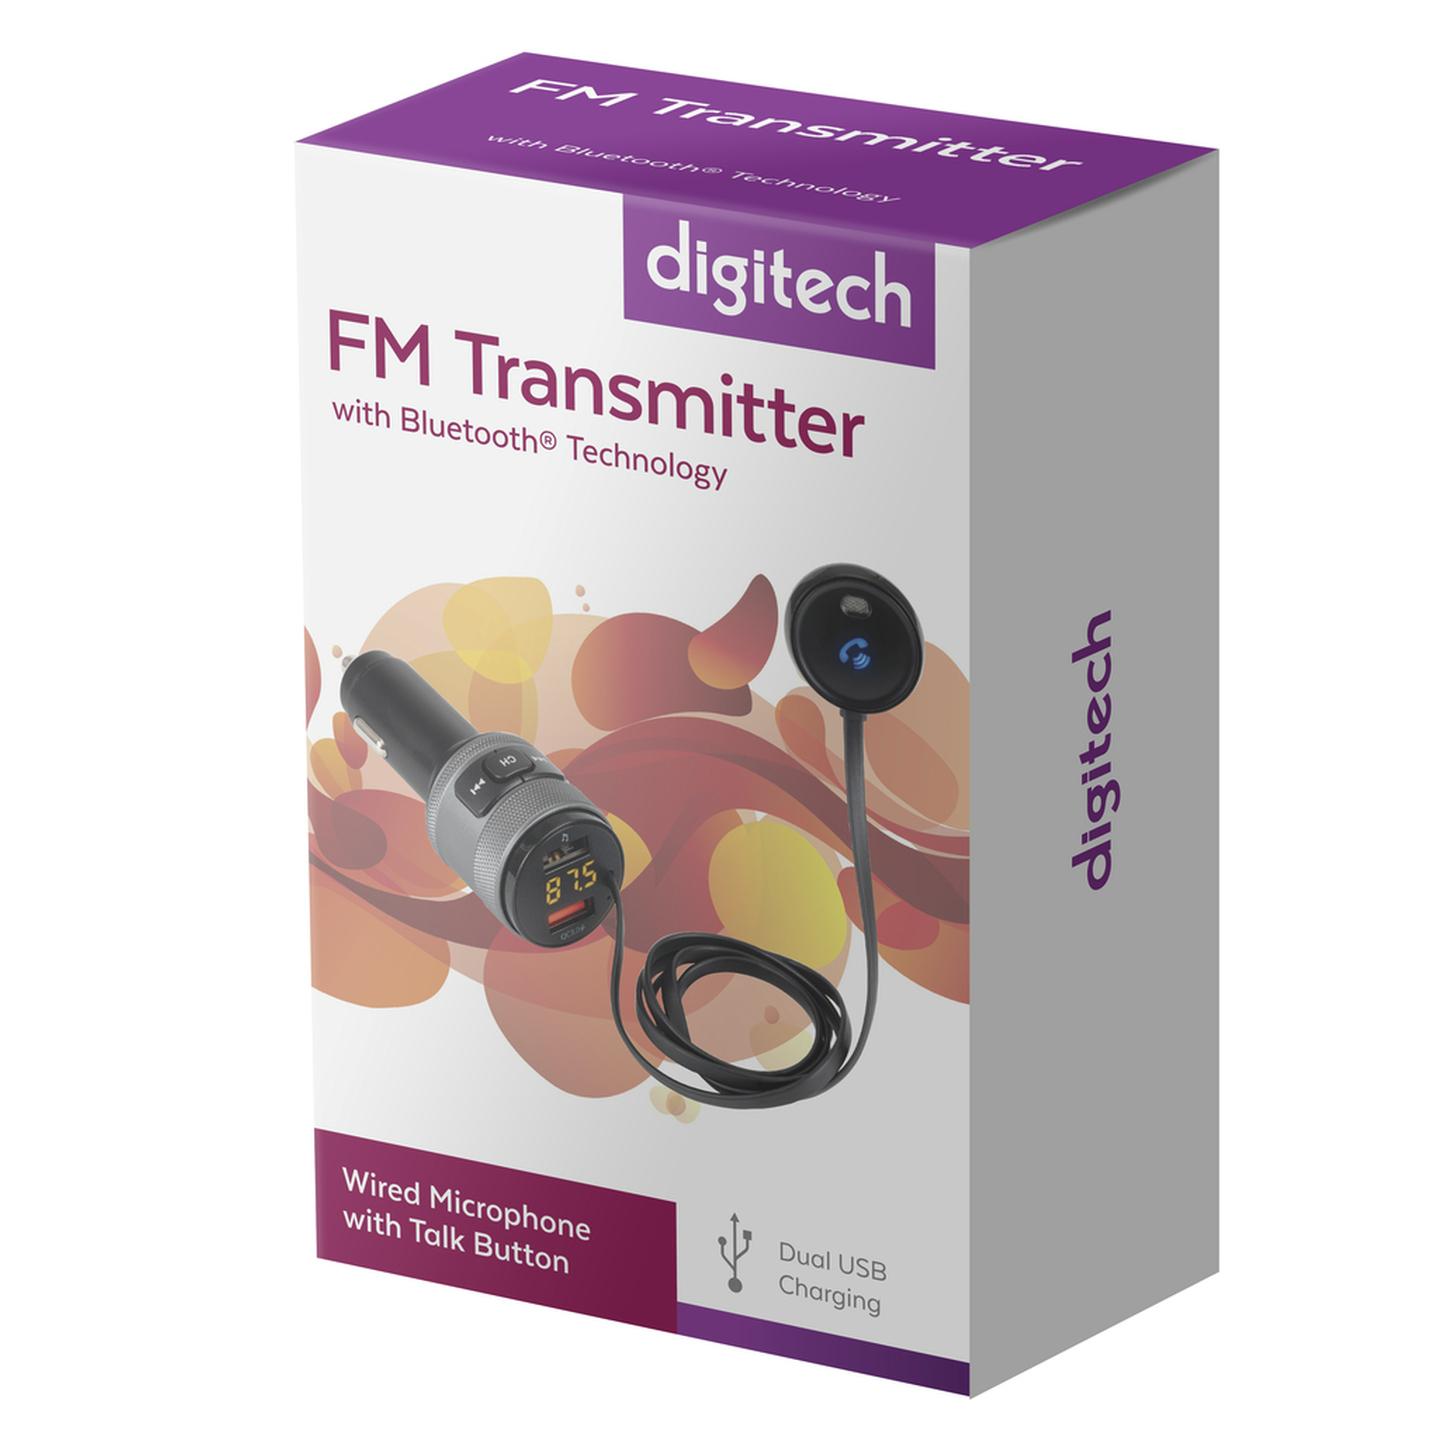 Digitech FM Transmitter with Bluetooth Technology USB and Microphone Extension